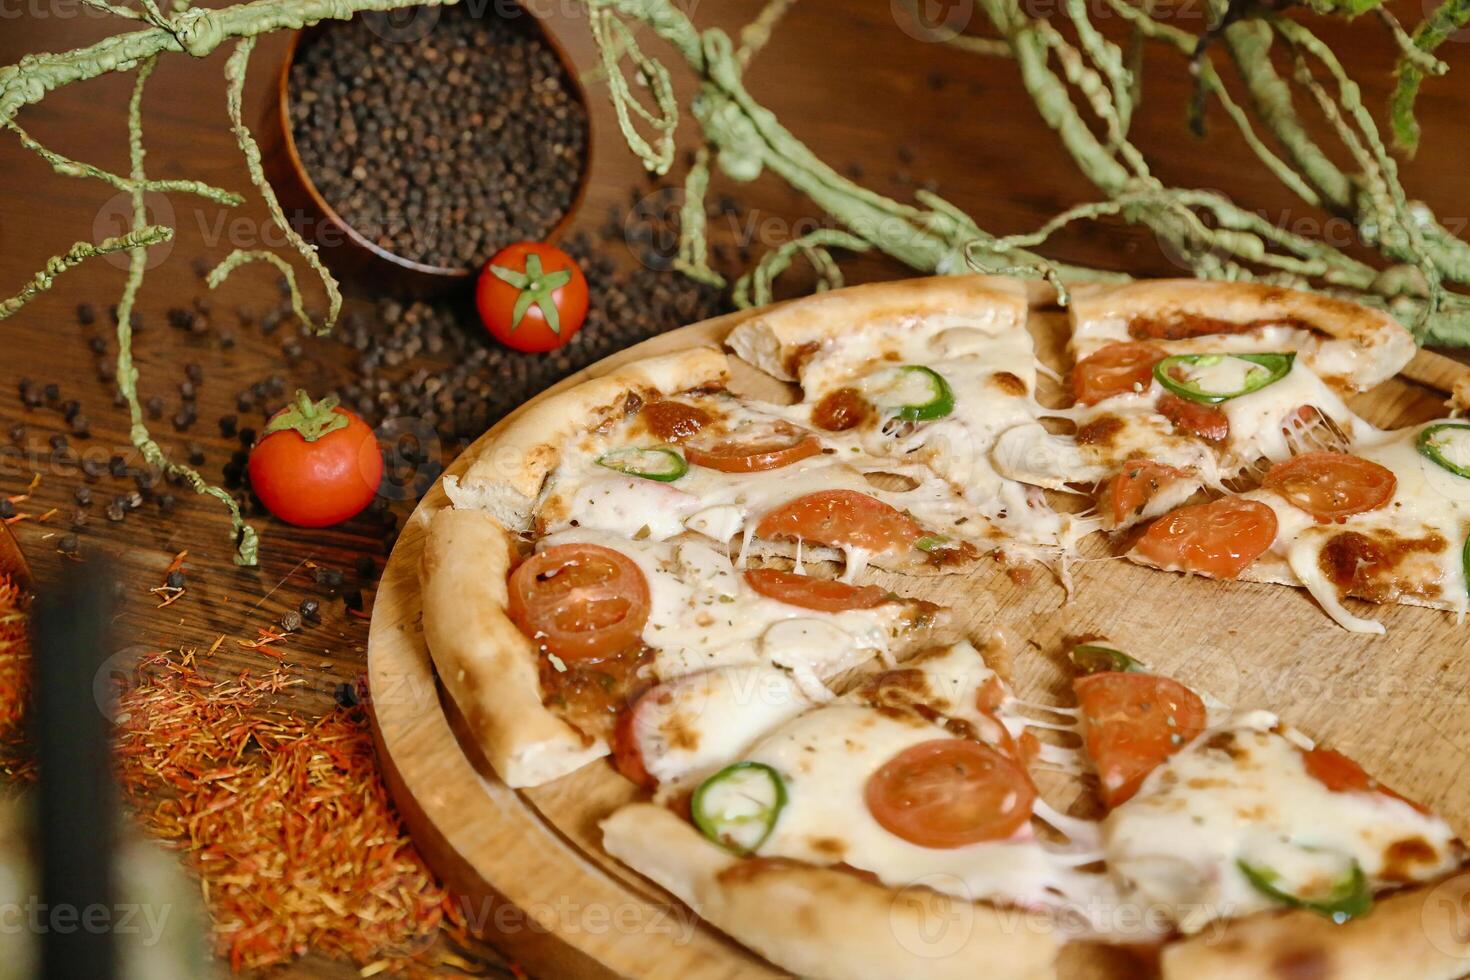 Pizza on Wooden Cutting Board photo